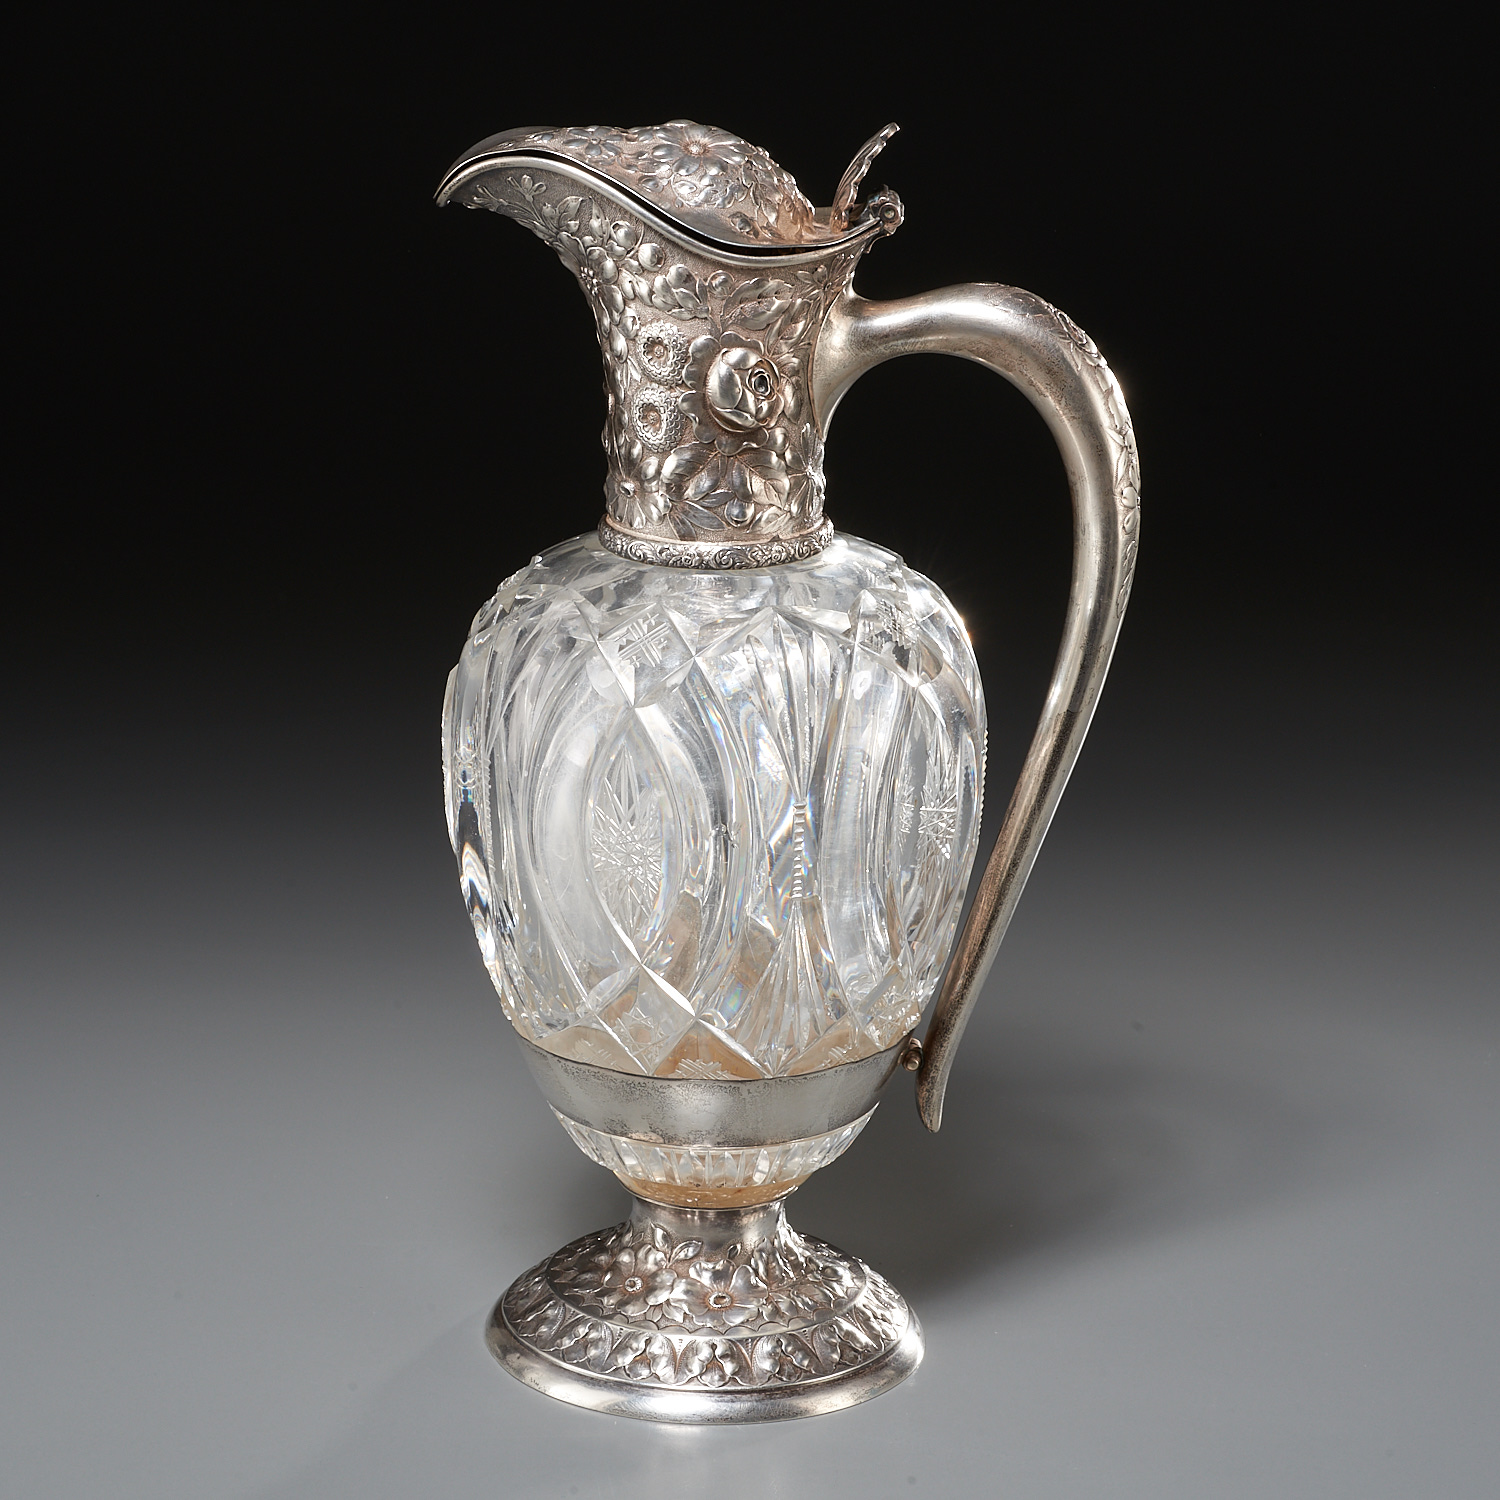 GORHAM REPOUSSE SILVER MOUNTED